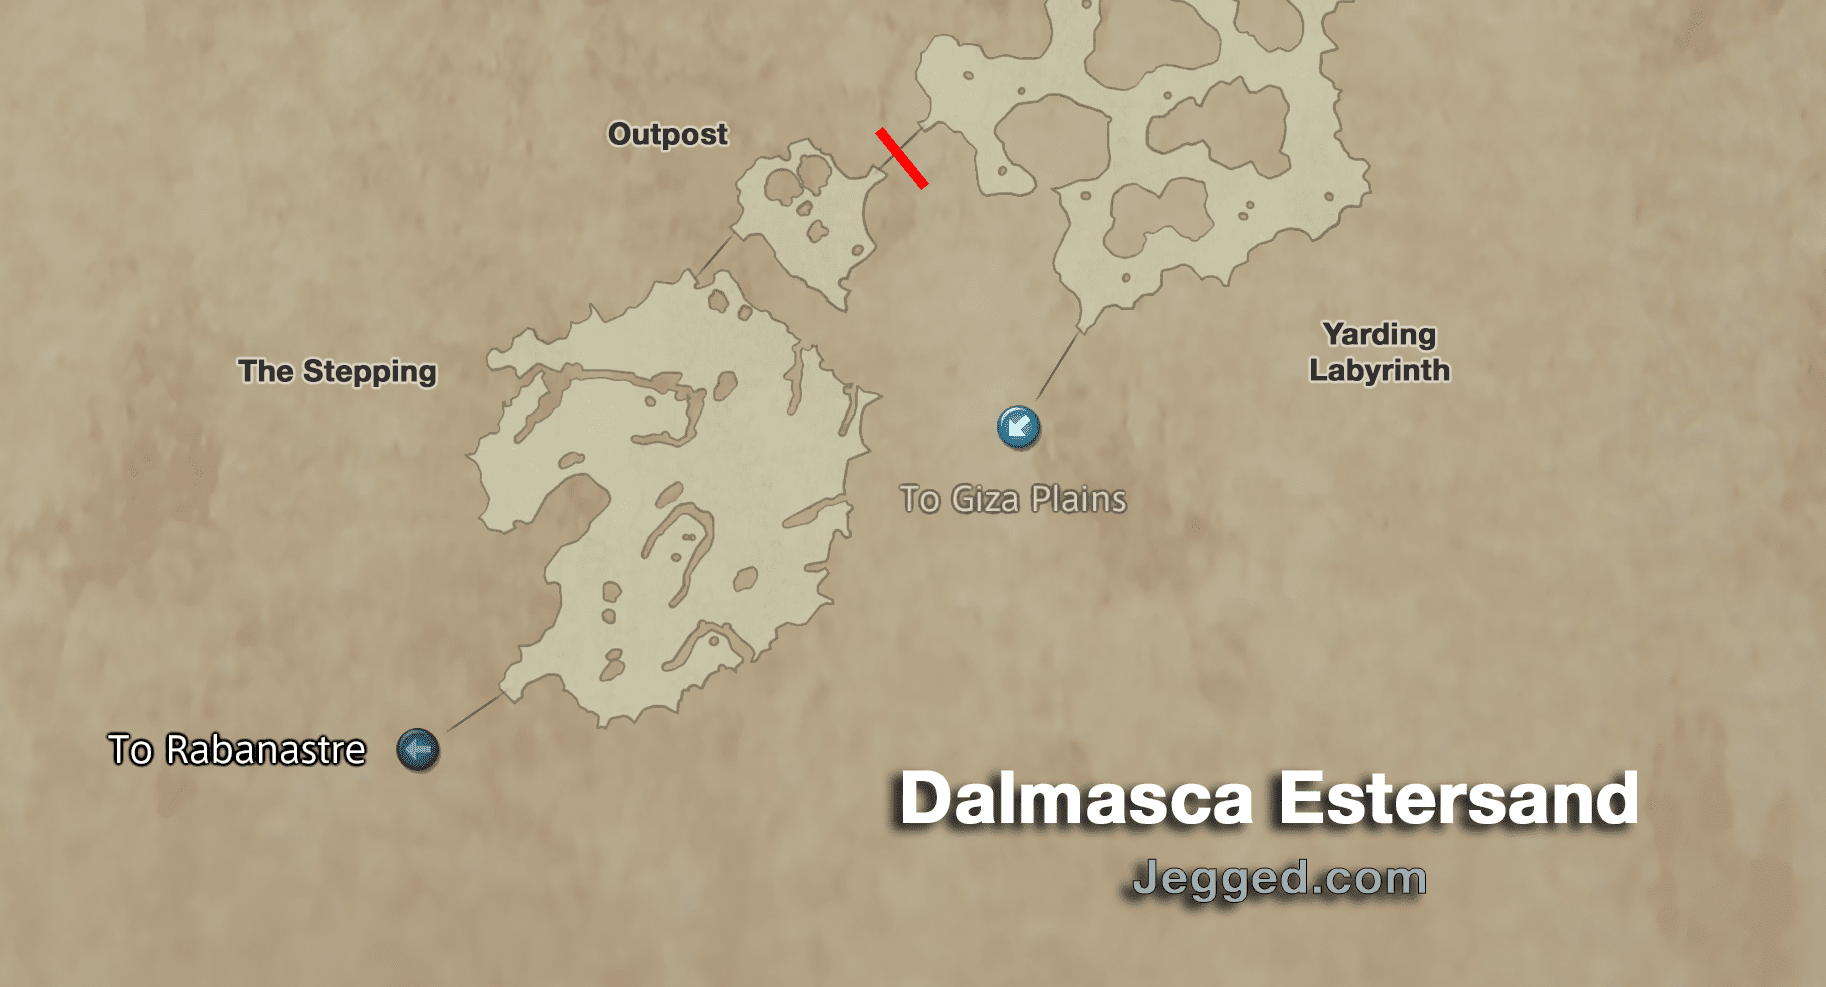 Map of Dalmasca Estersand with the Outpost Blocked off